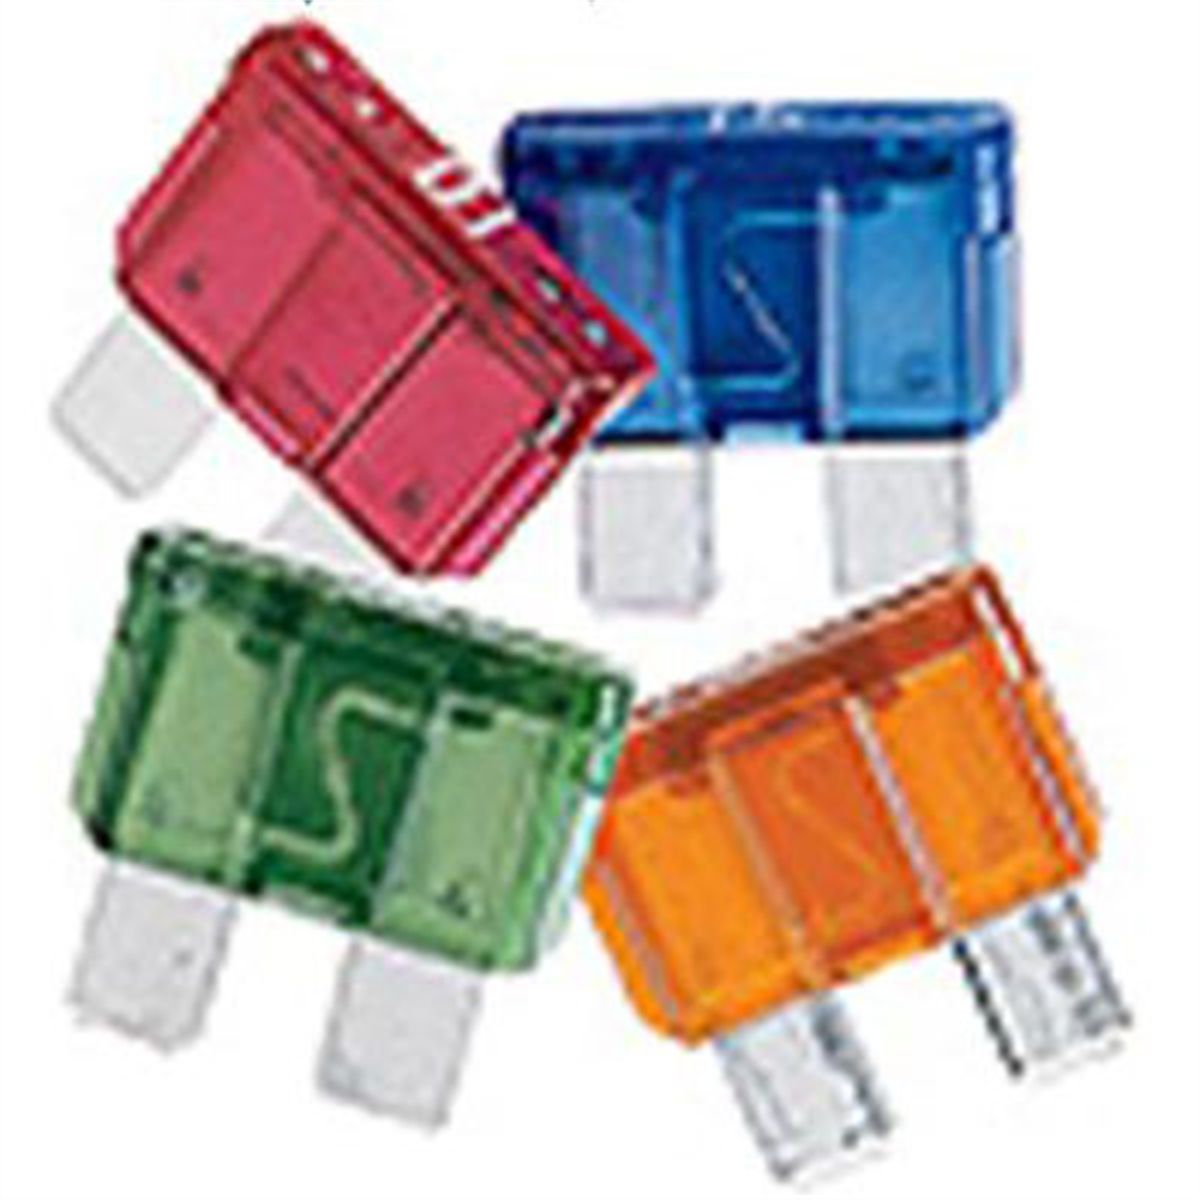 15 Amp Fast Acting Blade Fuse, Blue 25 Pack